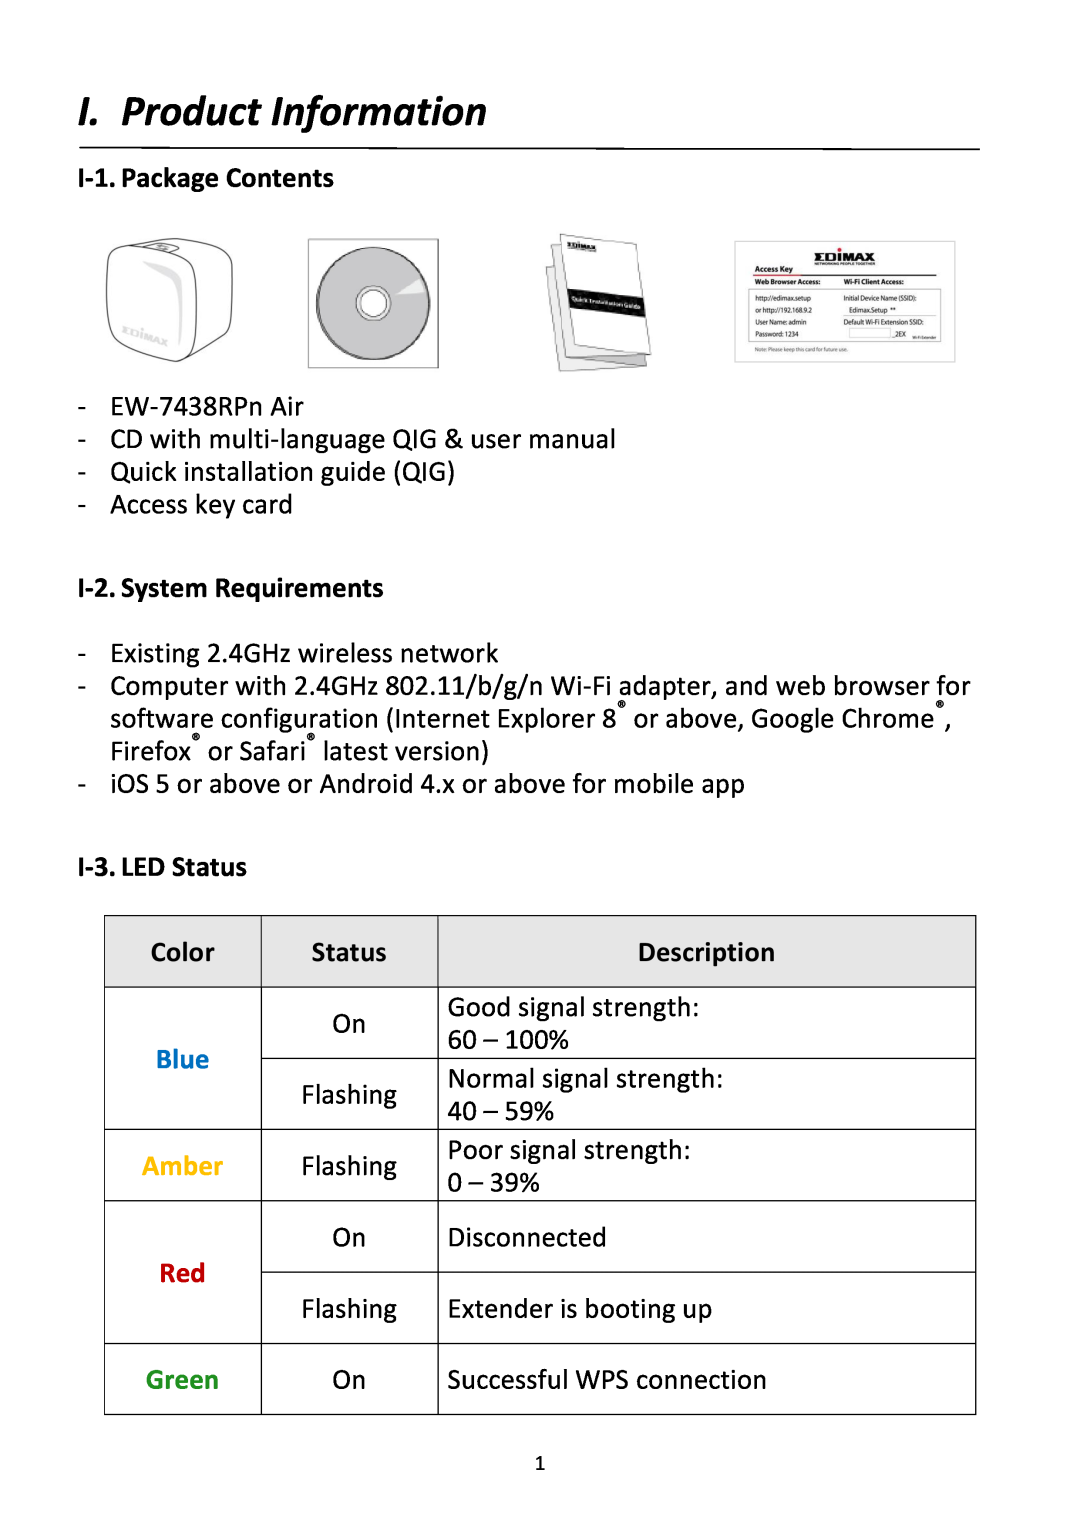 Edimax Technology EW-7438RPn I. Product Information, I-1. Package Contents, I-2. System Requirements, I-3. LED Status 